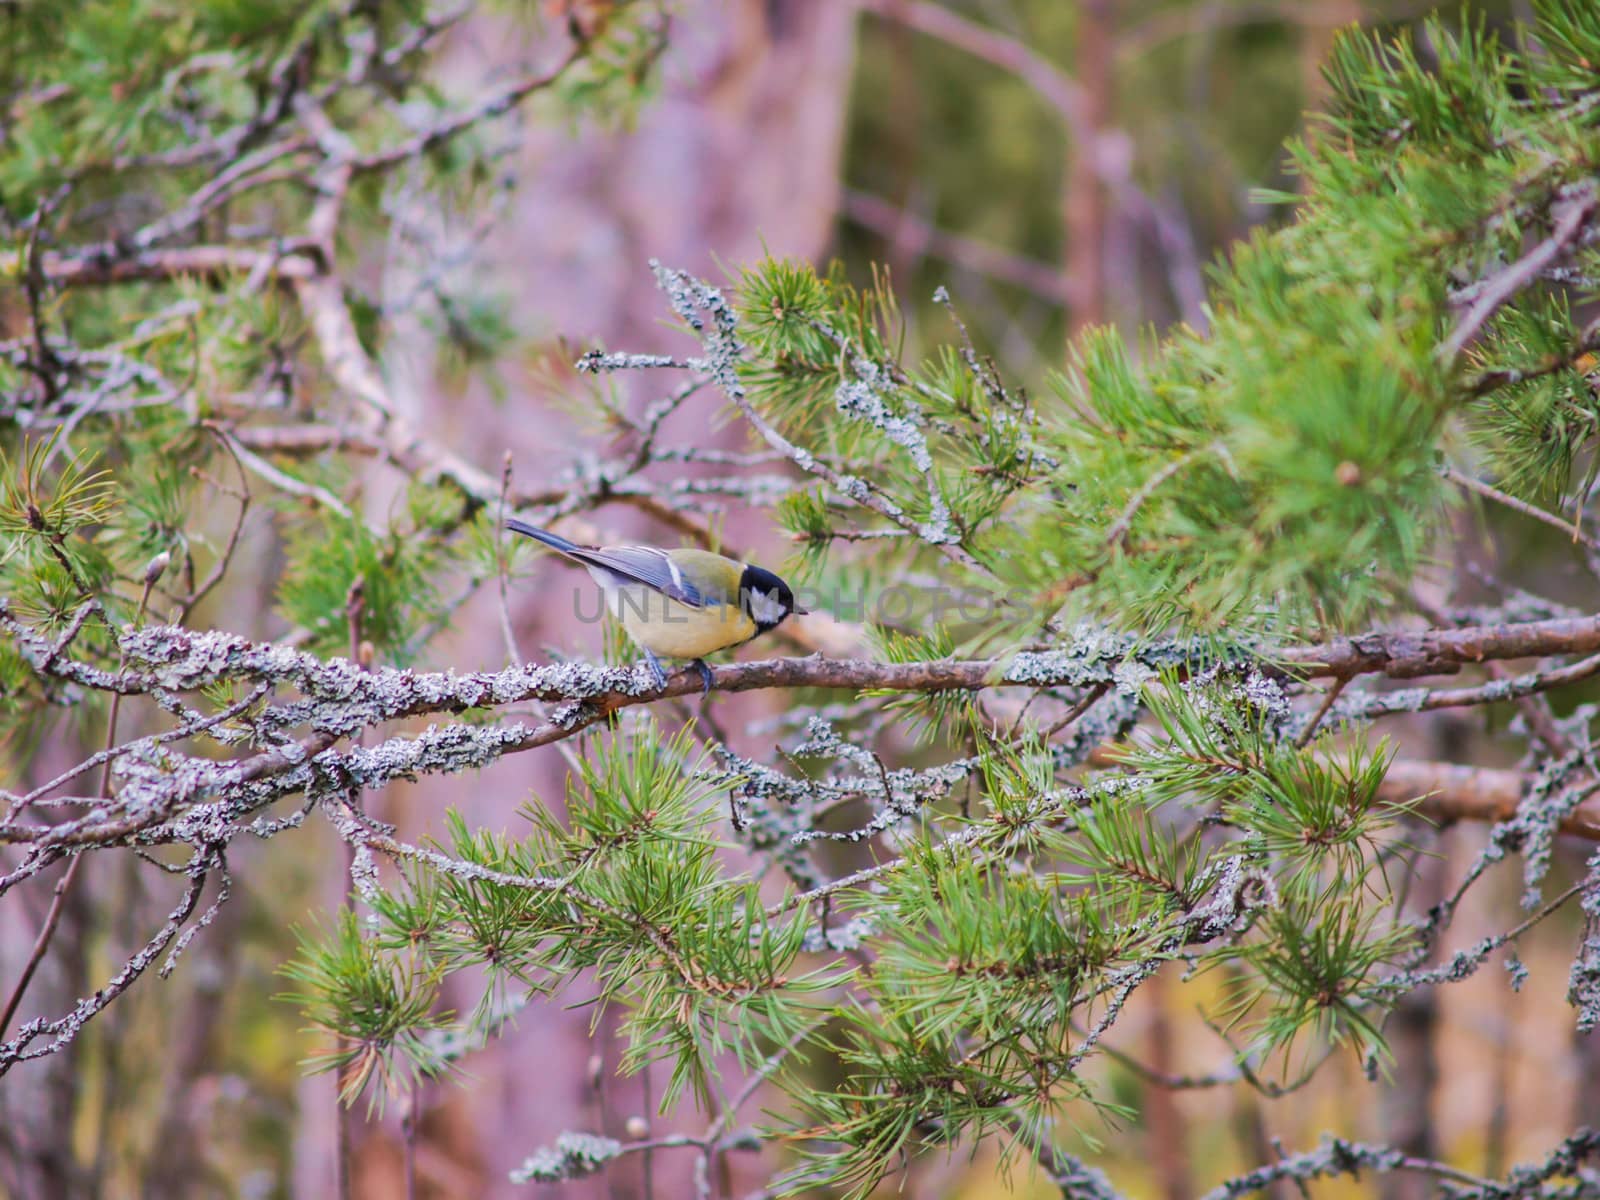 Titmouse up in a pine tree at daytime